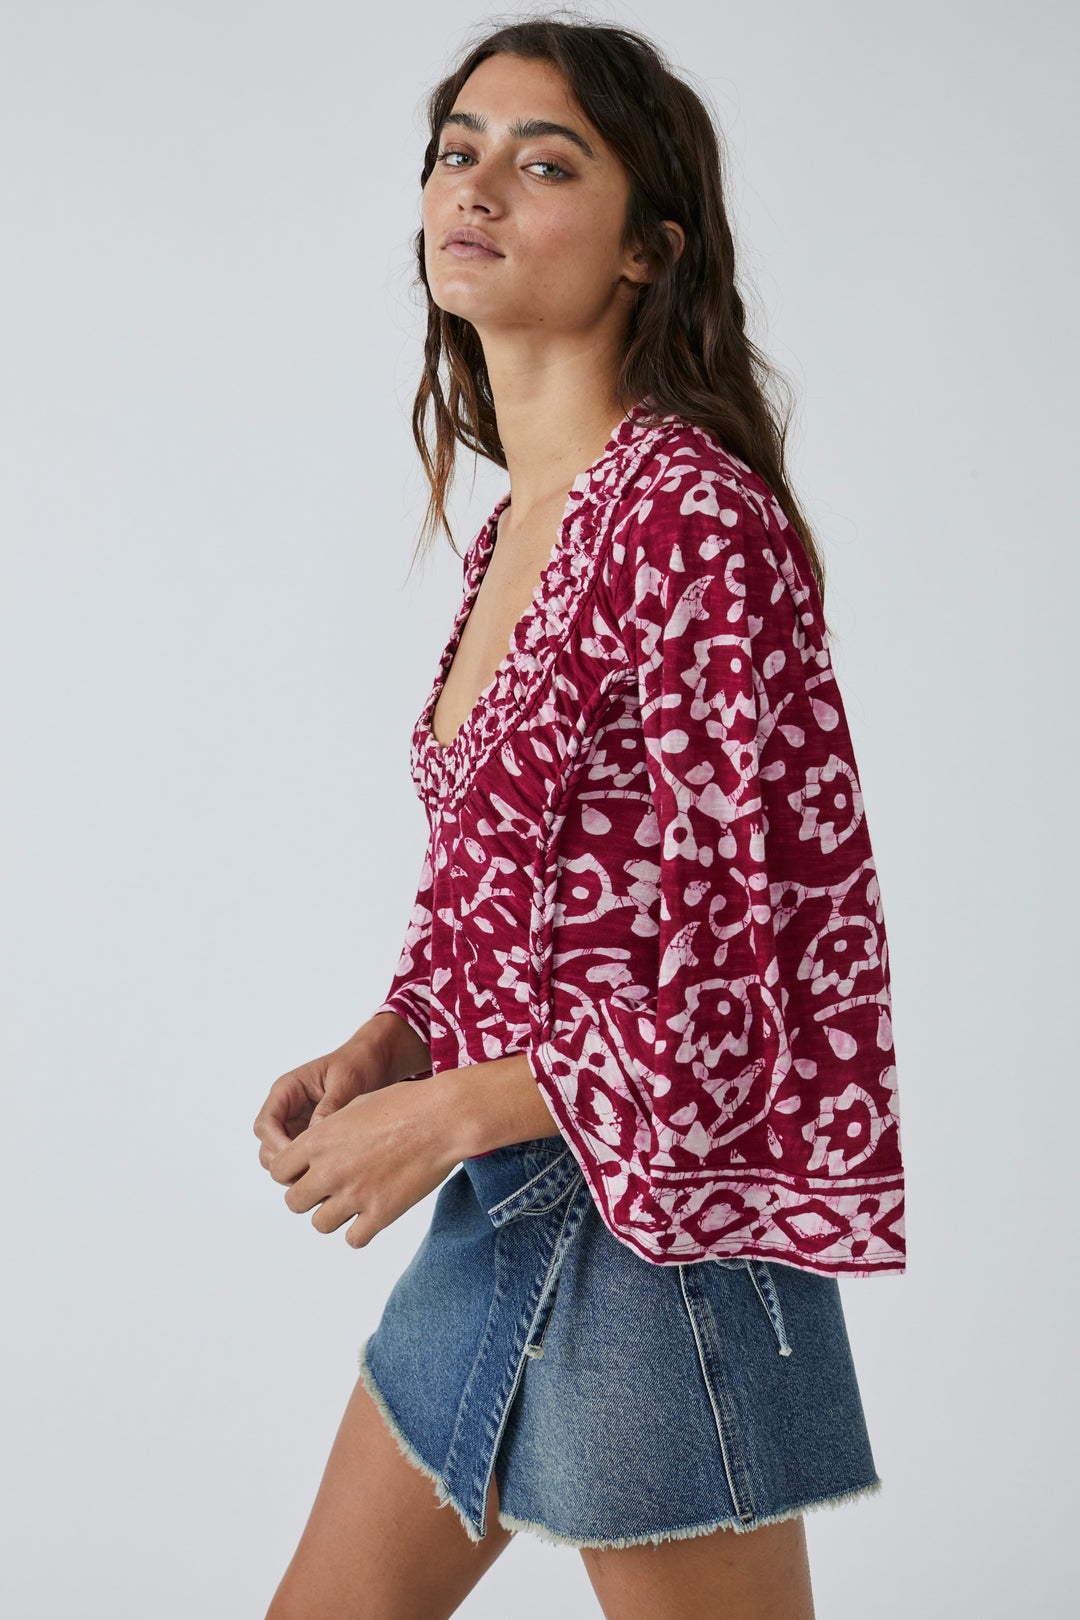 Free People On The Block Top